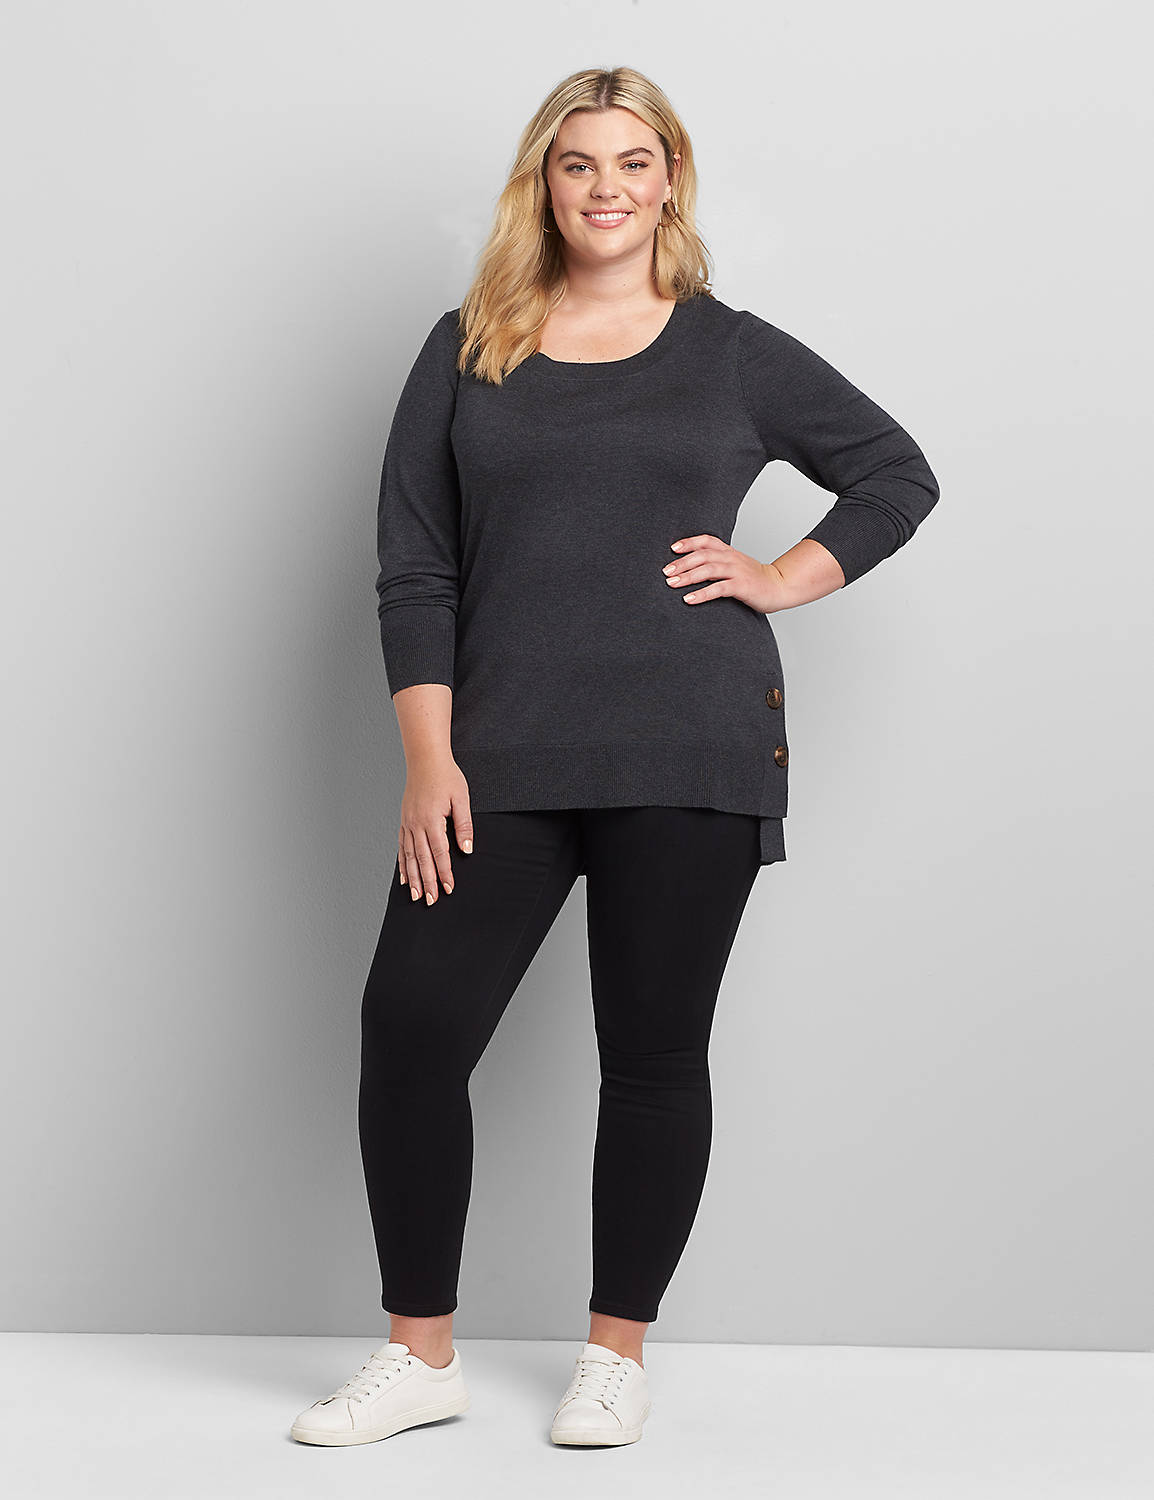 OUTLET LONG SLEEVE SCOOP NECK HI LO BUTTON SIDE TUNIC SWEATER 1113589:Charcoal Heather Huafu #H385:10/12 Product Image 3